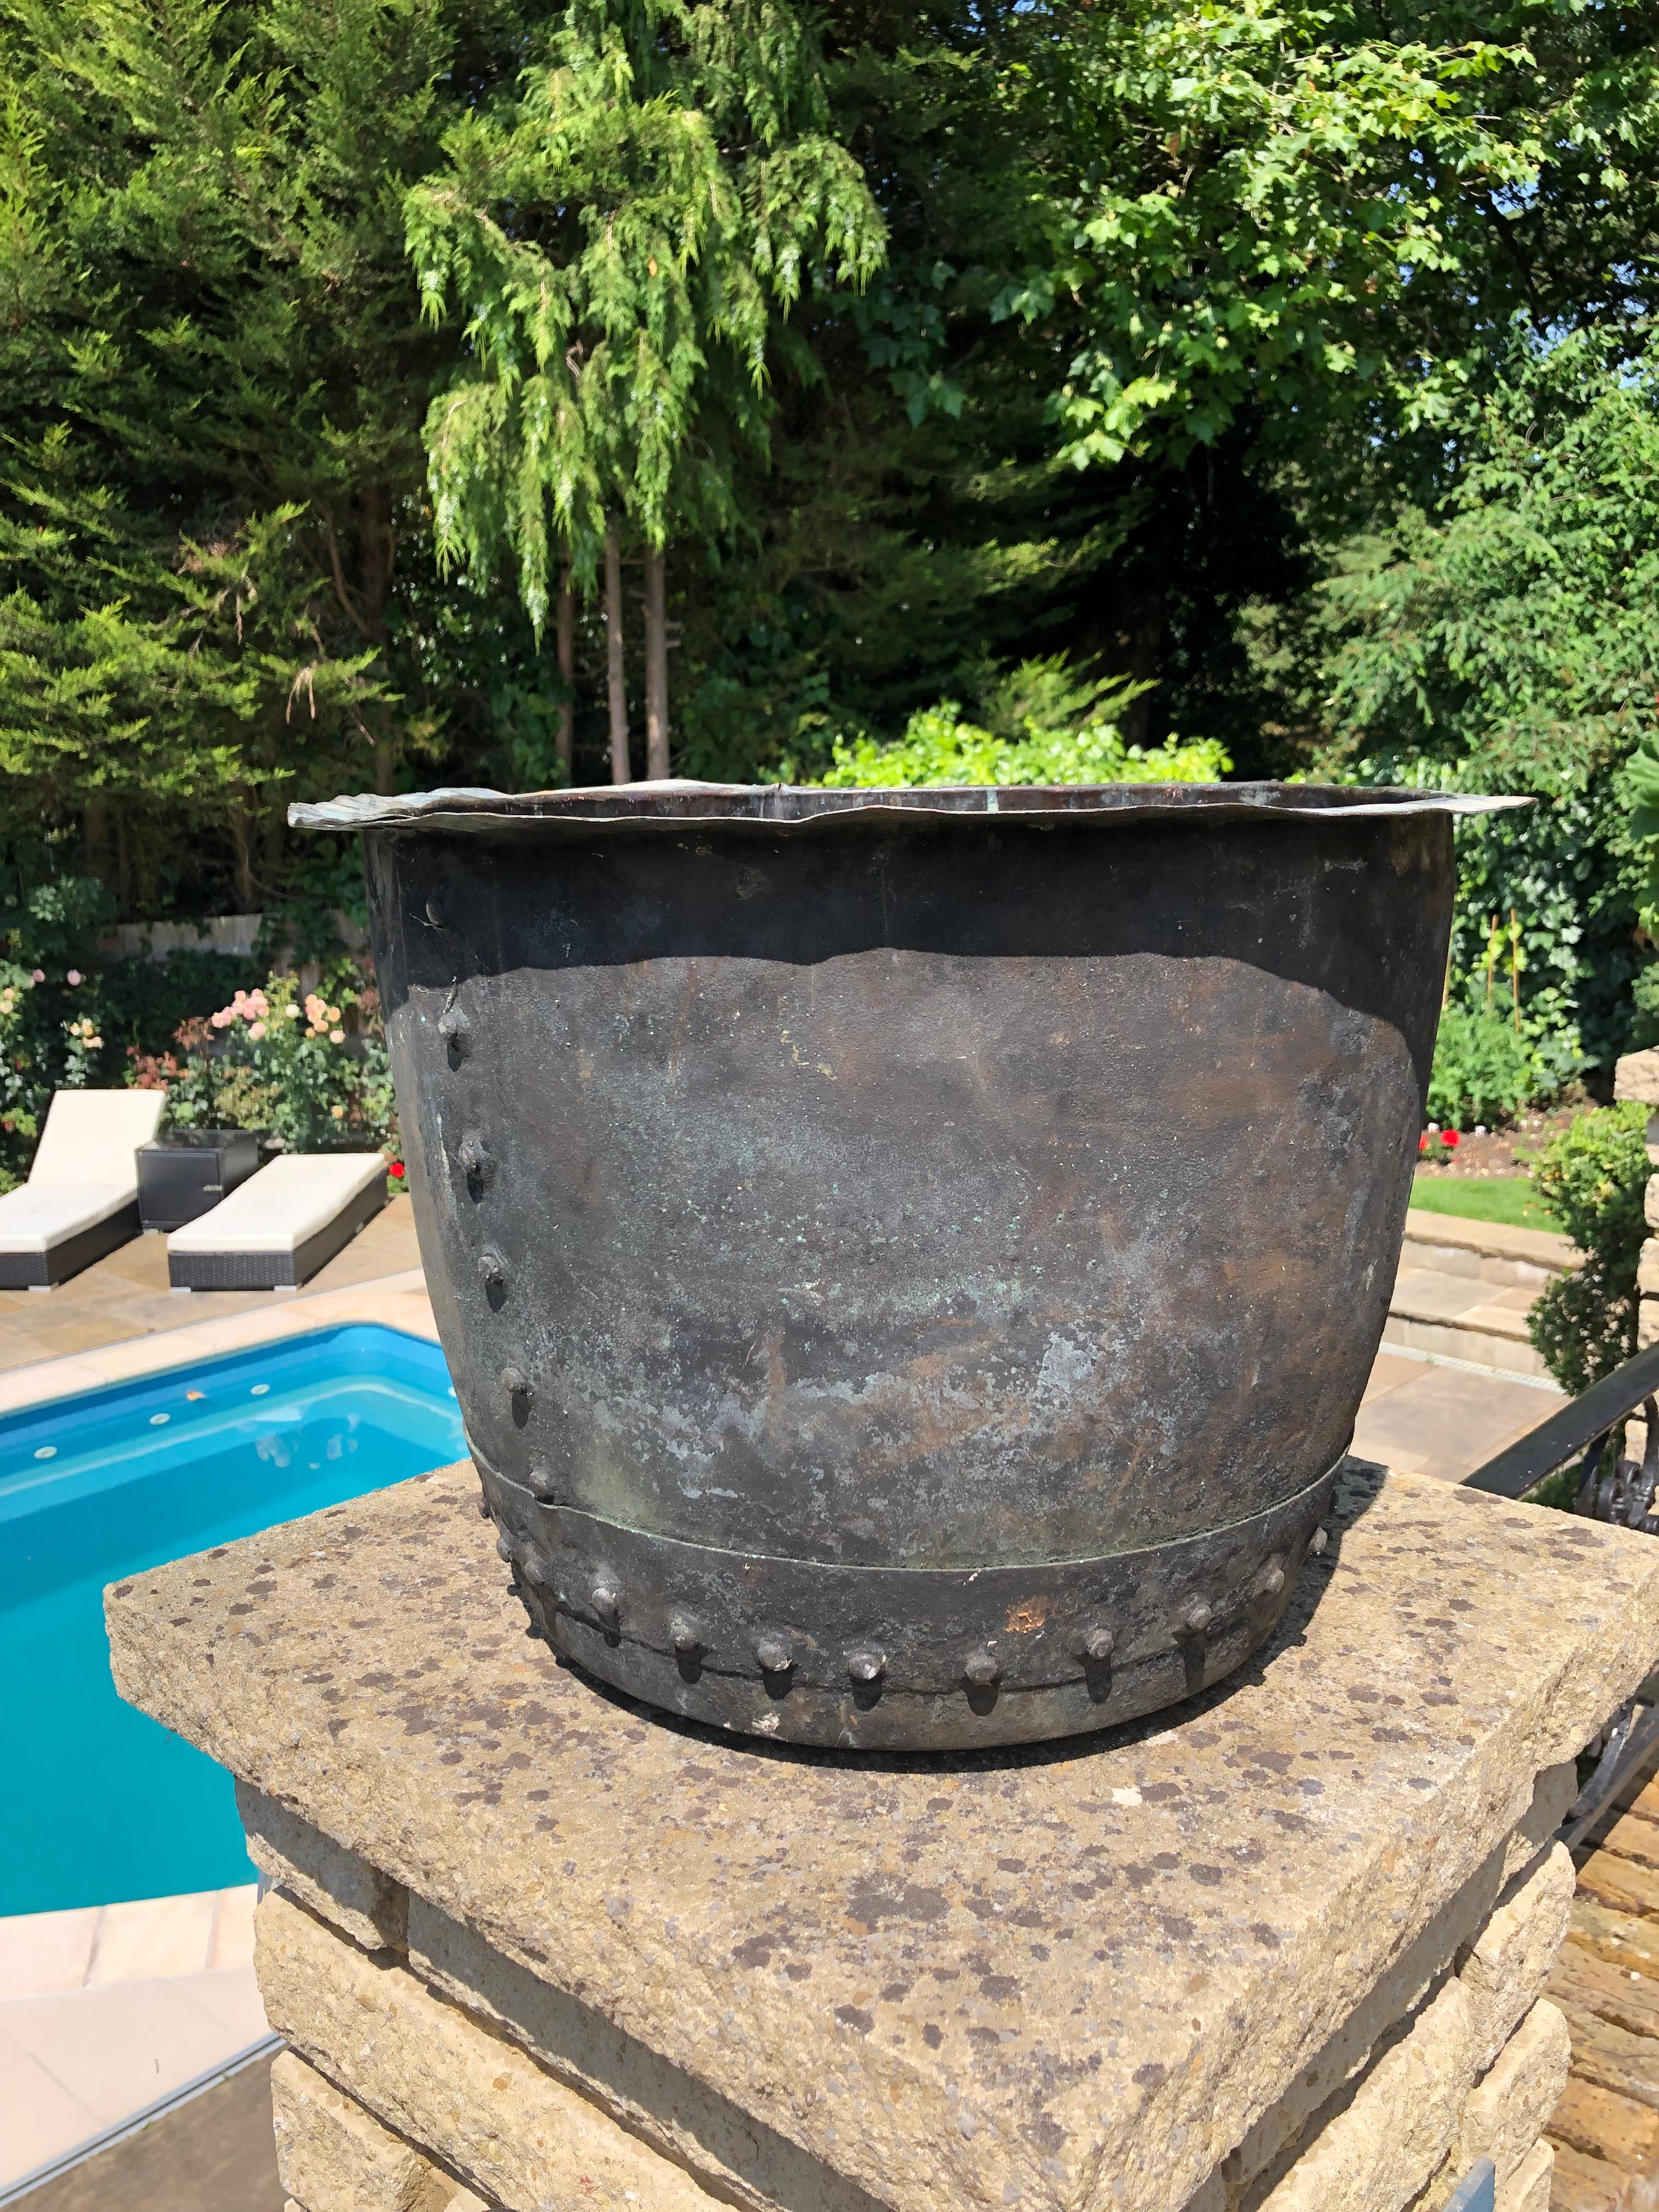 An English Victorian large riveted copper planter, originally used for boiling water for washing/laundry. It has an excellent patina and no dents or holes, with bolt rivets to side and base. These make excellent planters or log bins. Originally